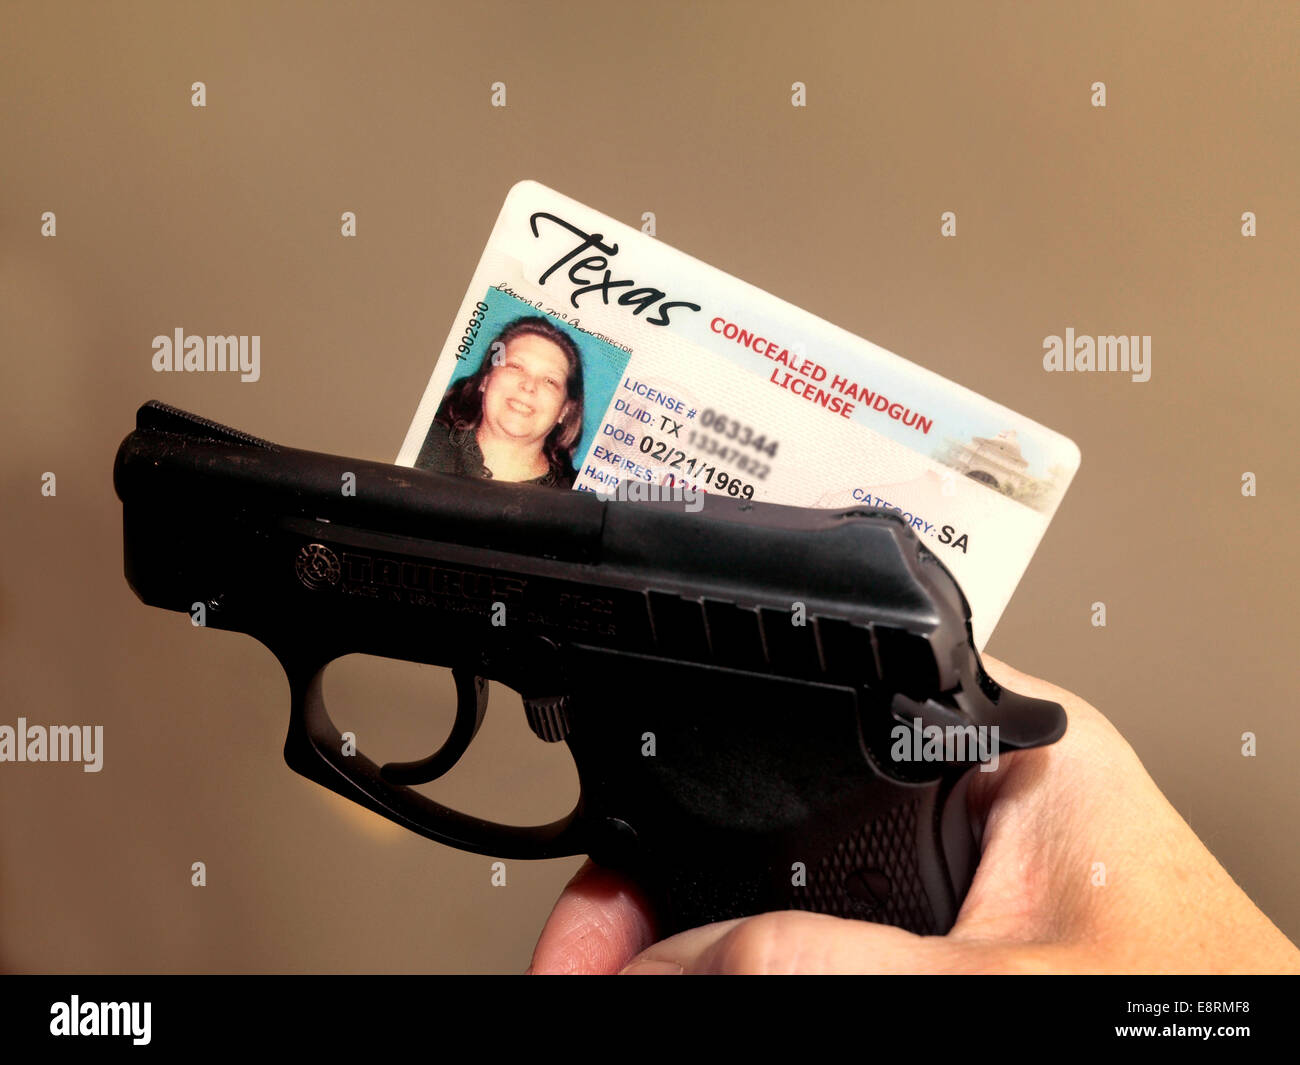 Woman in Texas has a permit for concealed handgun, but police still  confiscated her hand gun.. NRA now fights to get the right to carry guns  openly. Texas drivers license shows she